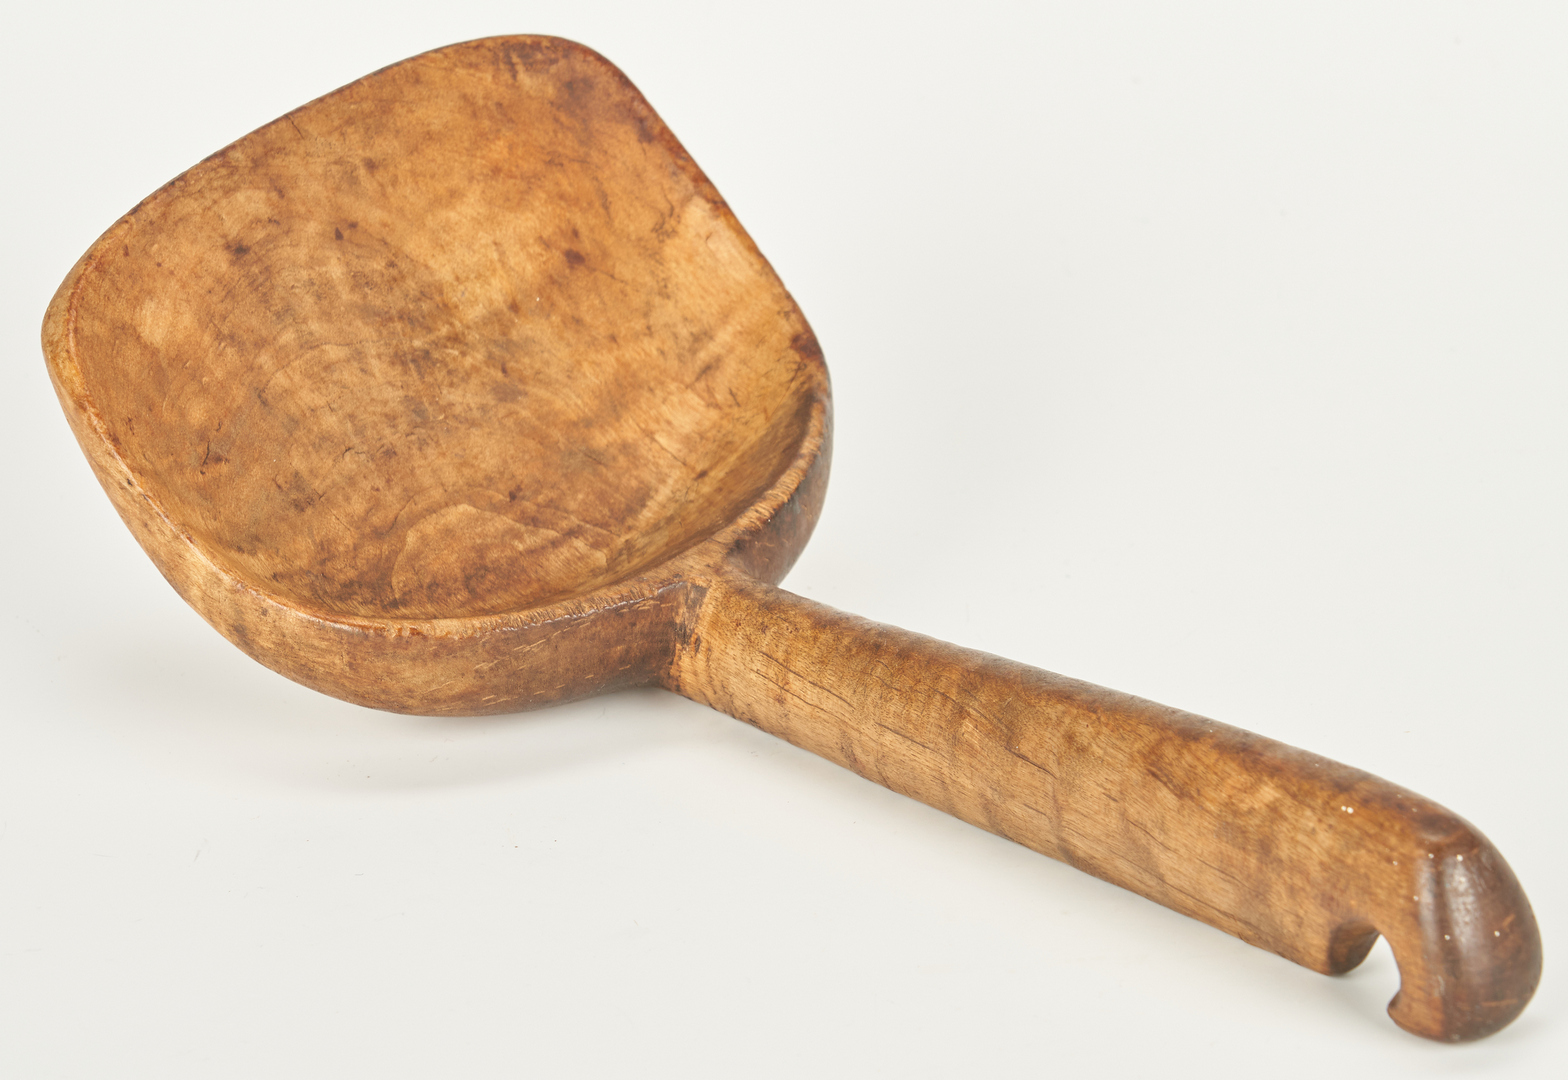 Lot 182: 11 Wooden Kitchen Tools, Tiger Maple and Burl